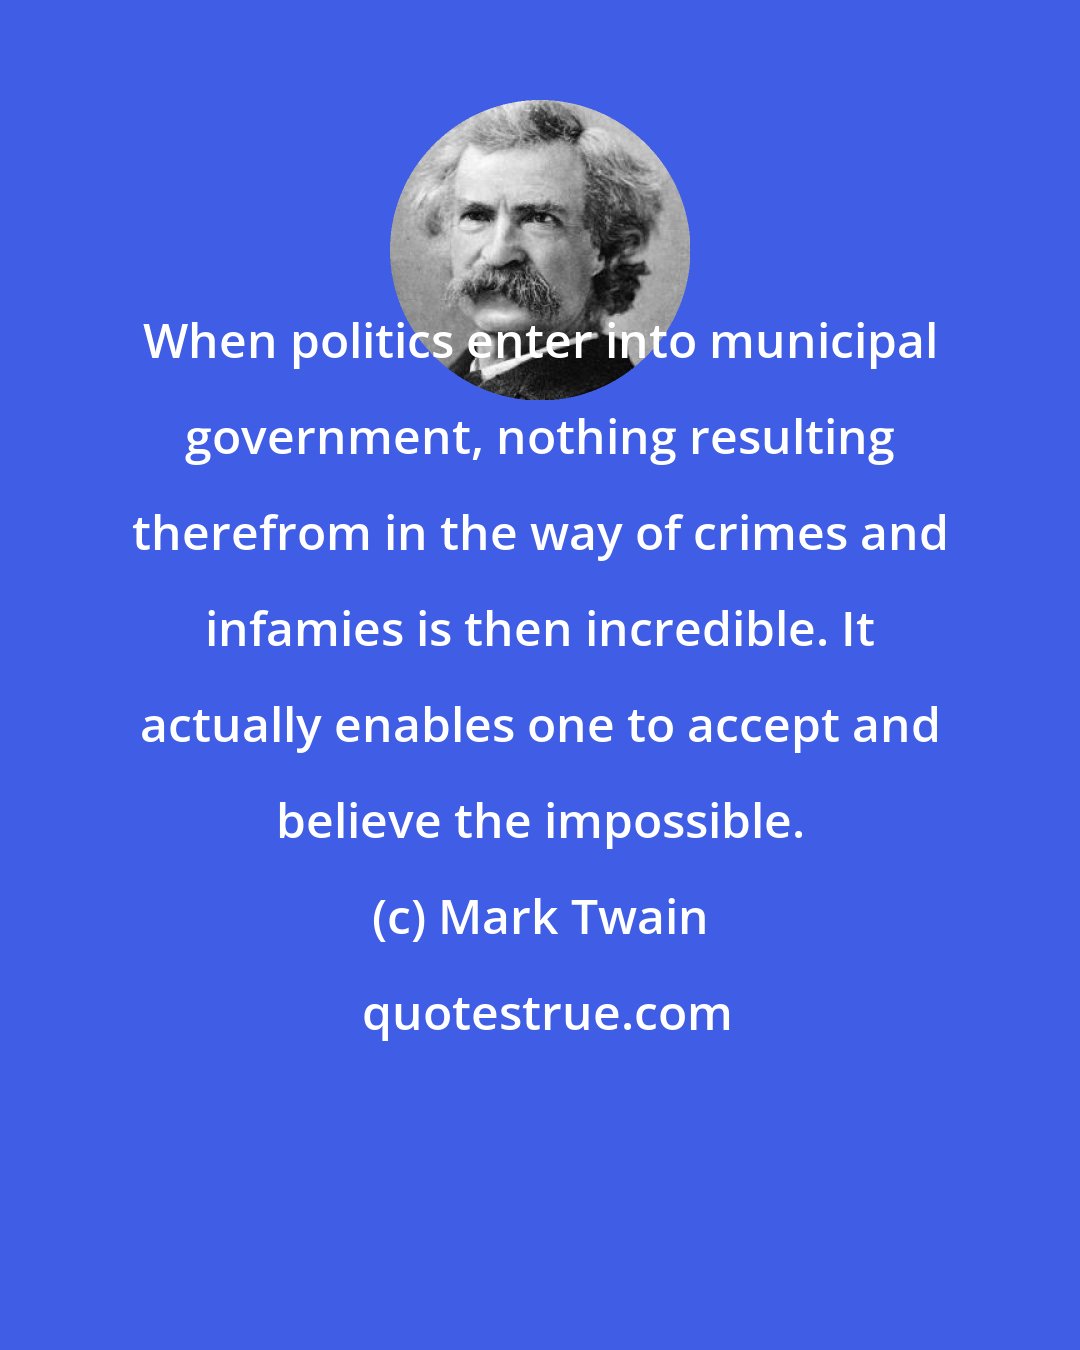 Mark Twain: When politics enter into municipal government, nothing resulting therefrom in the way of crimes and infamies is then incredible. It actually enables one to accept and believe the impossible.